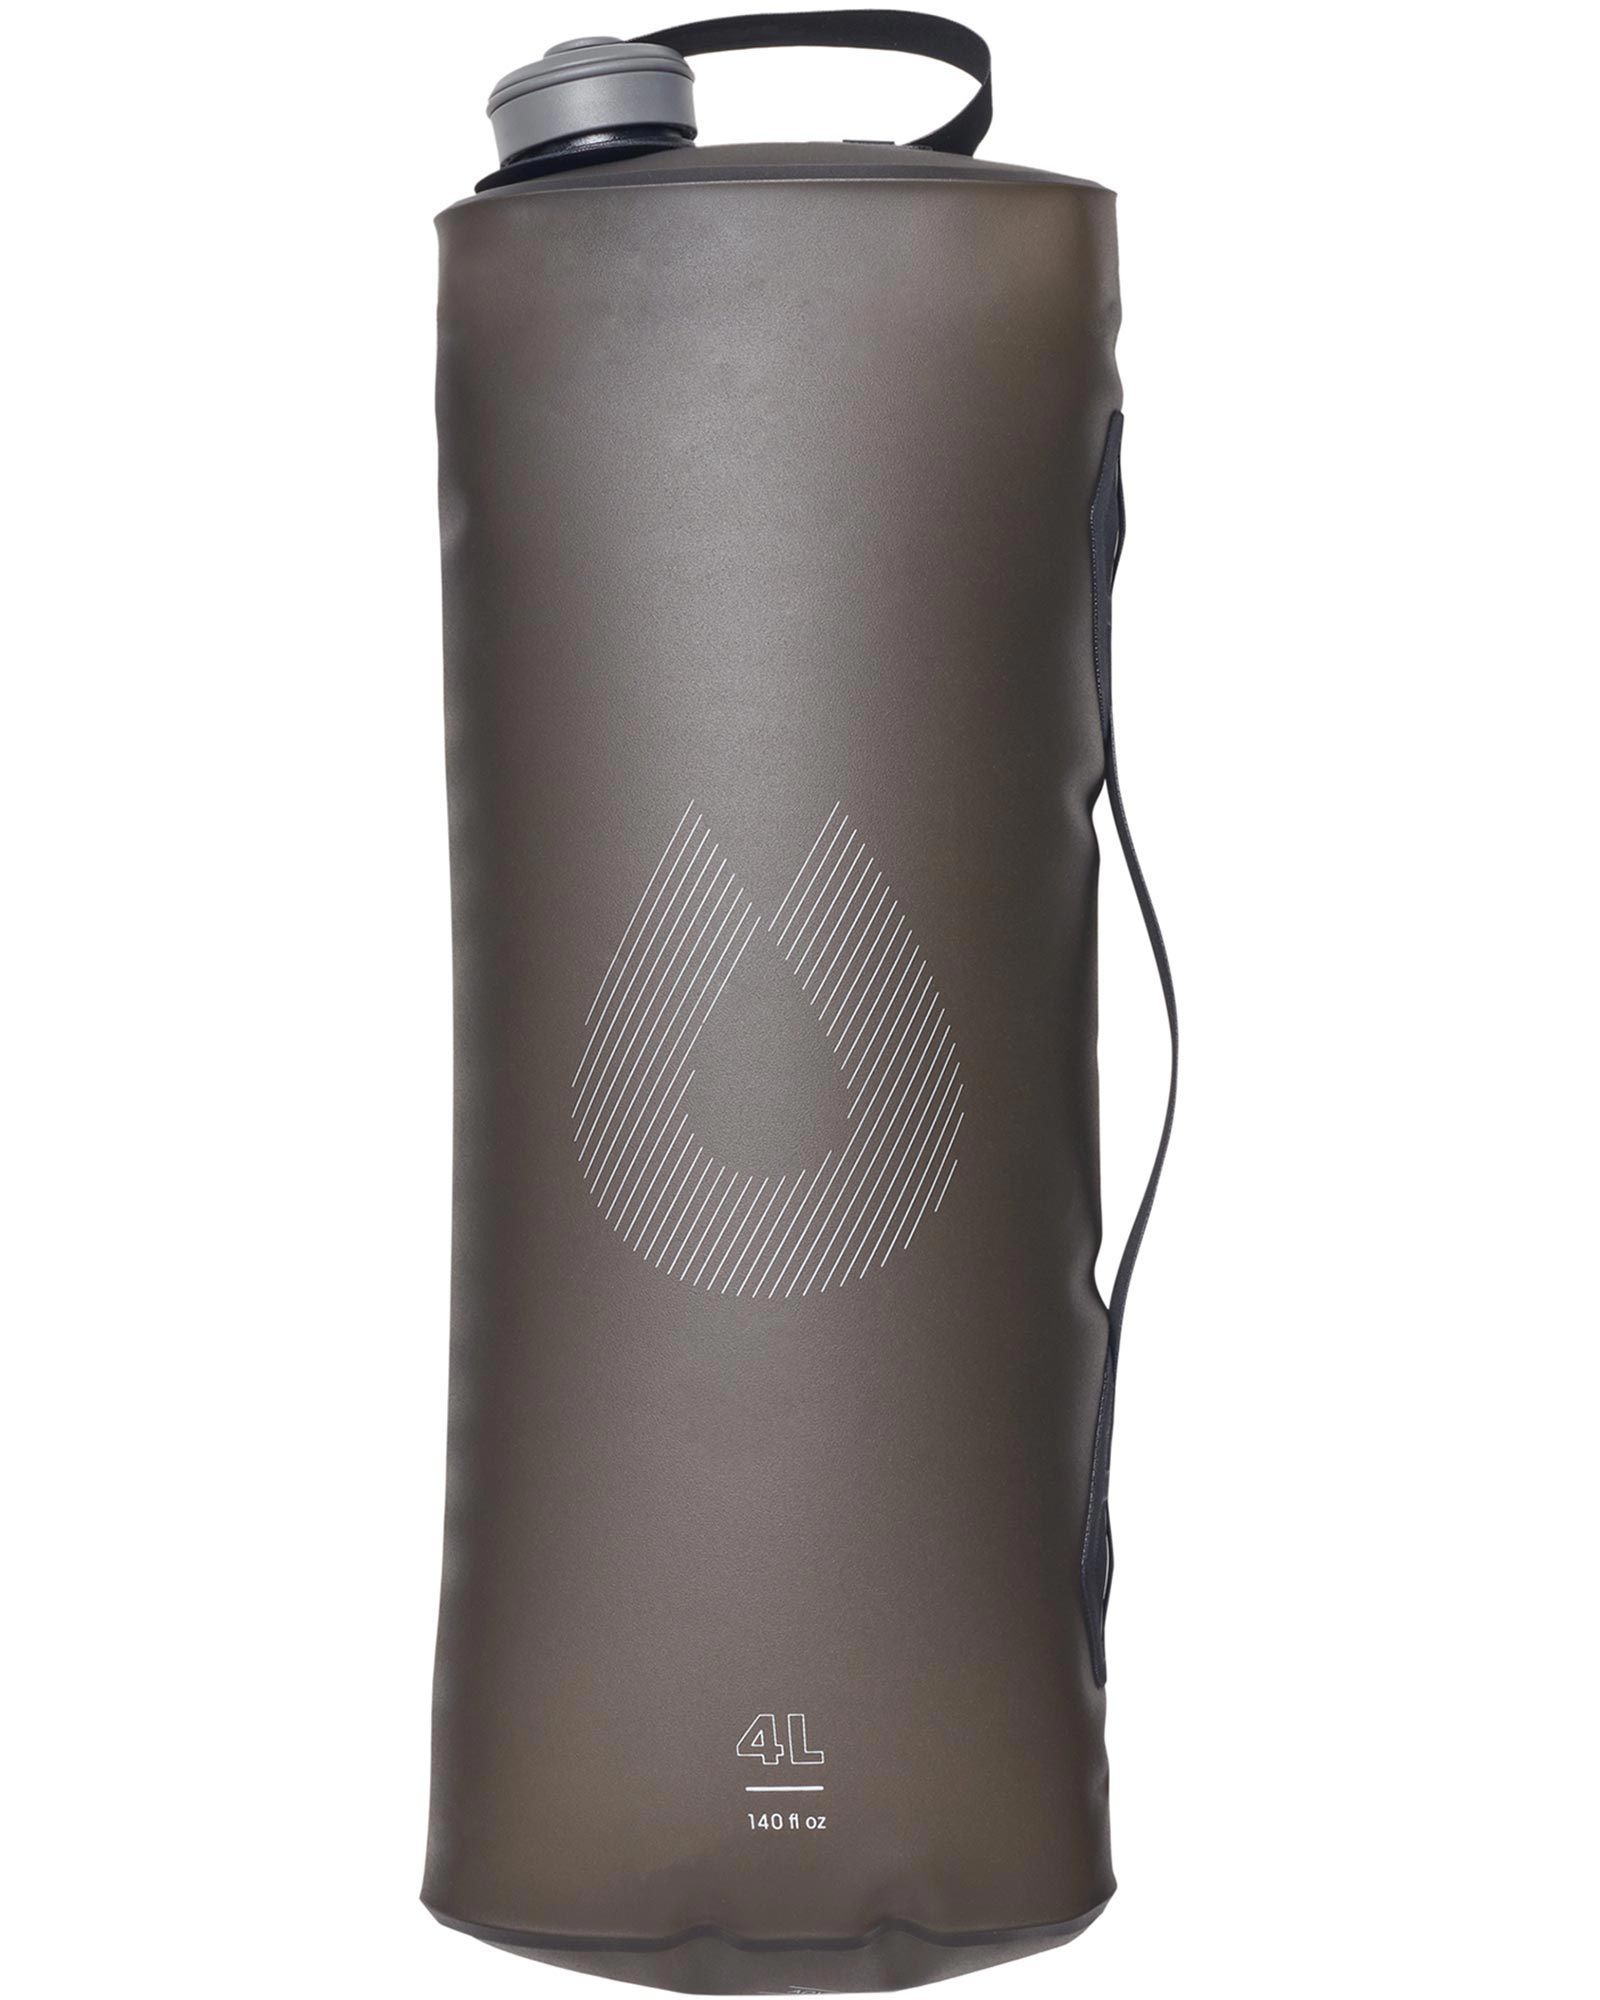 HydraPak Seeker 4L Water Container - Mammoth Grey